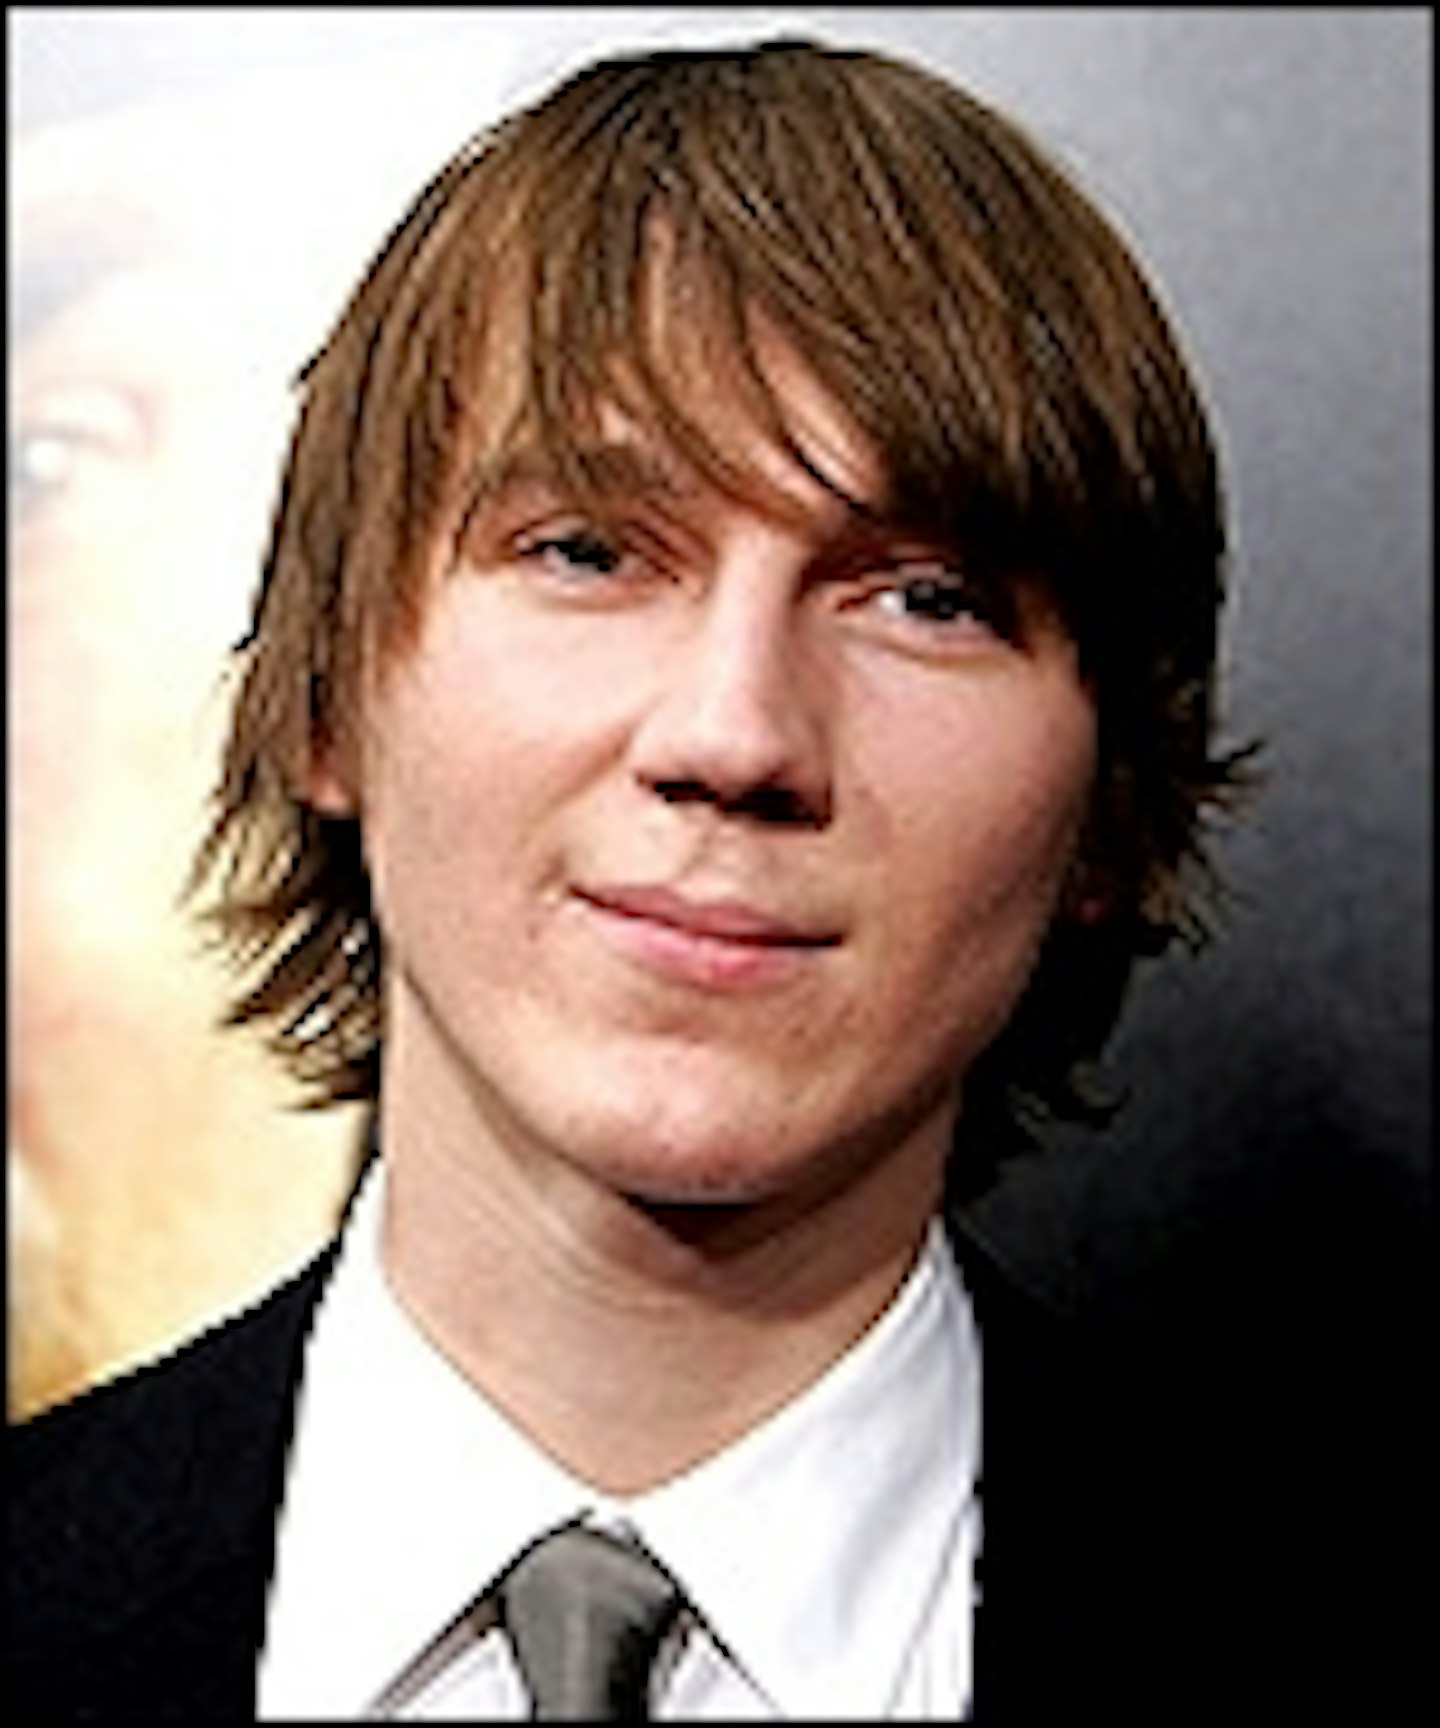 Paul Dano Joins... An Action Comedy?!?